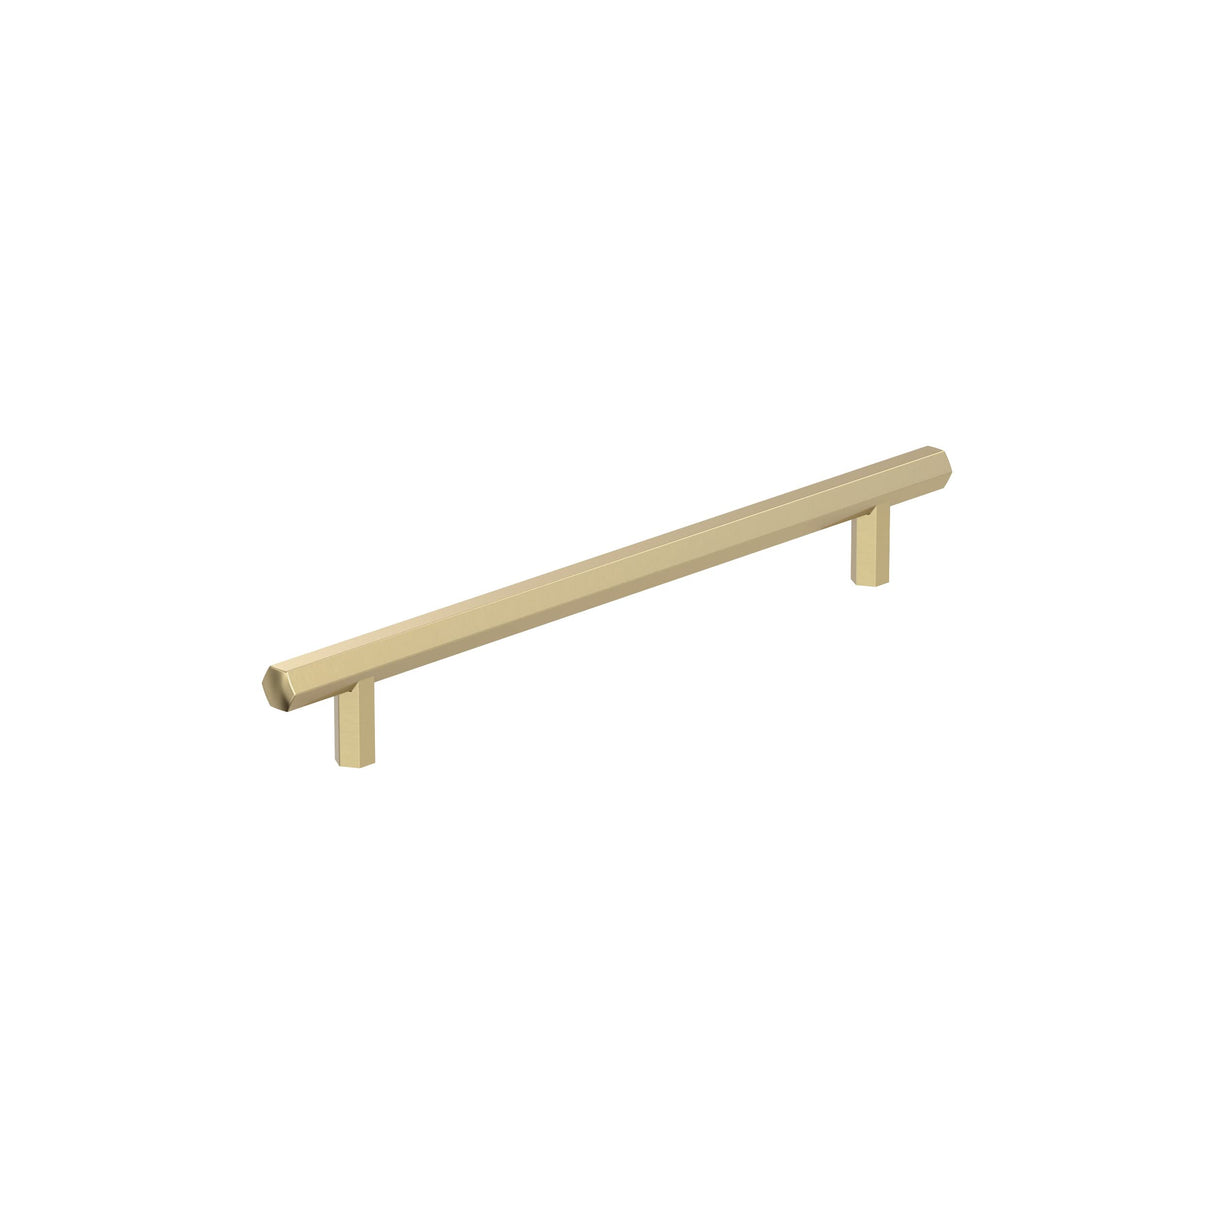 Amerock Cabinet Pull Golden Champagne 7-9/16 in (192 mm) Center-to-Center Drawer Pull Caliber Kitchen and Bath Hardware Furniture Hardware